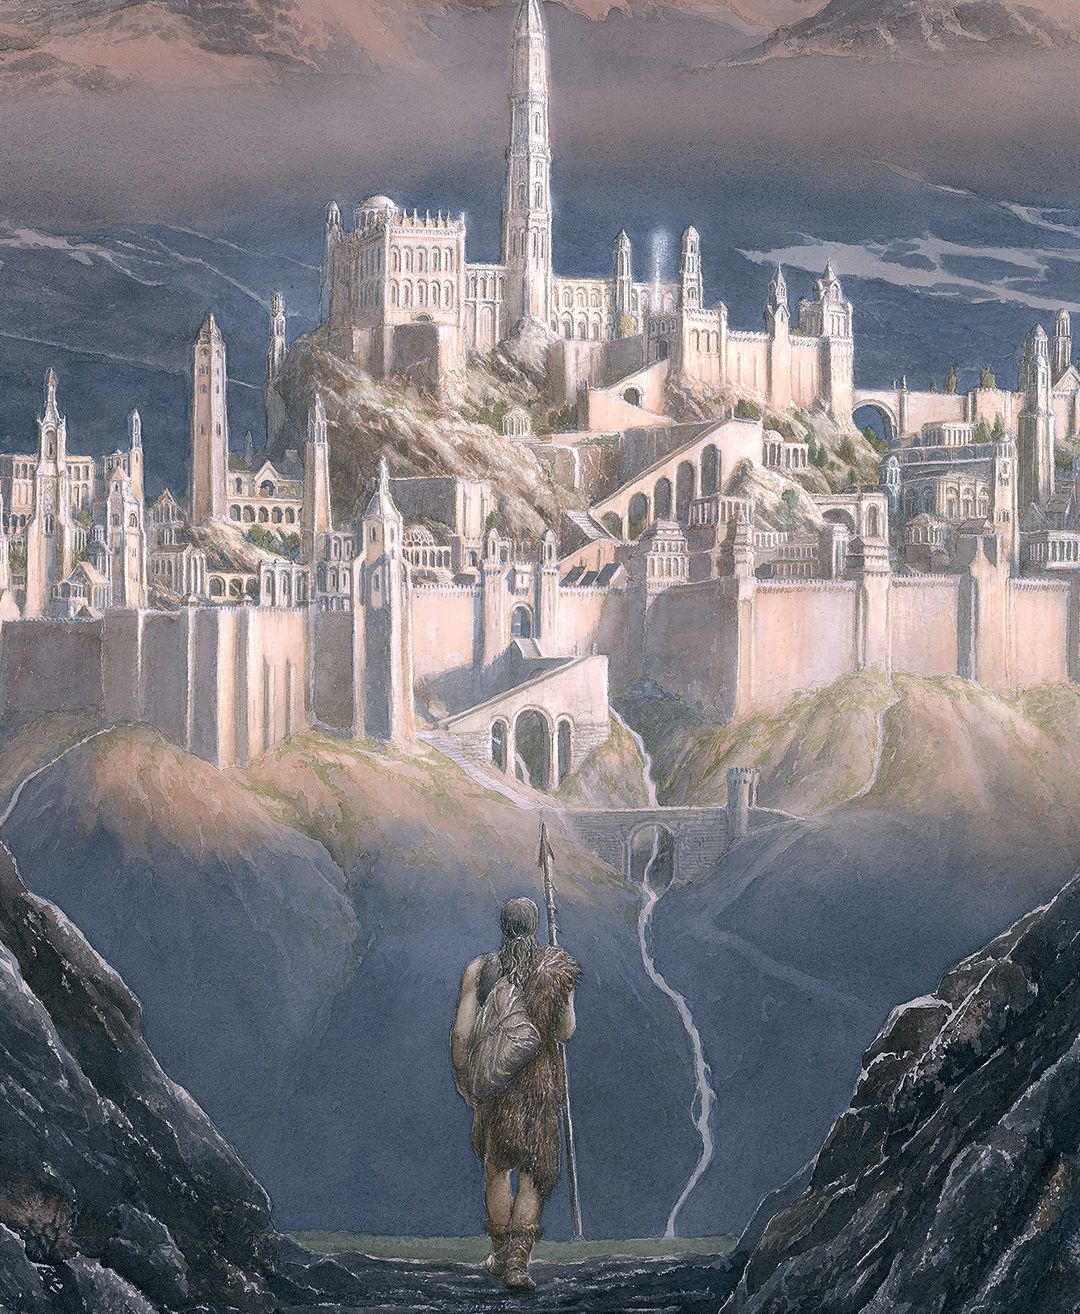 The Coming of Tuor to Gondolin